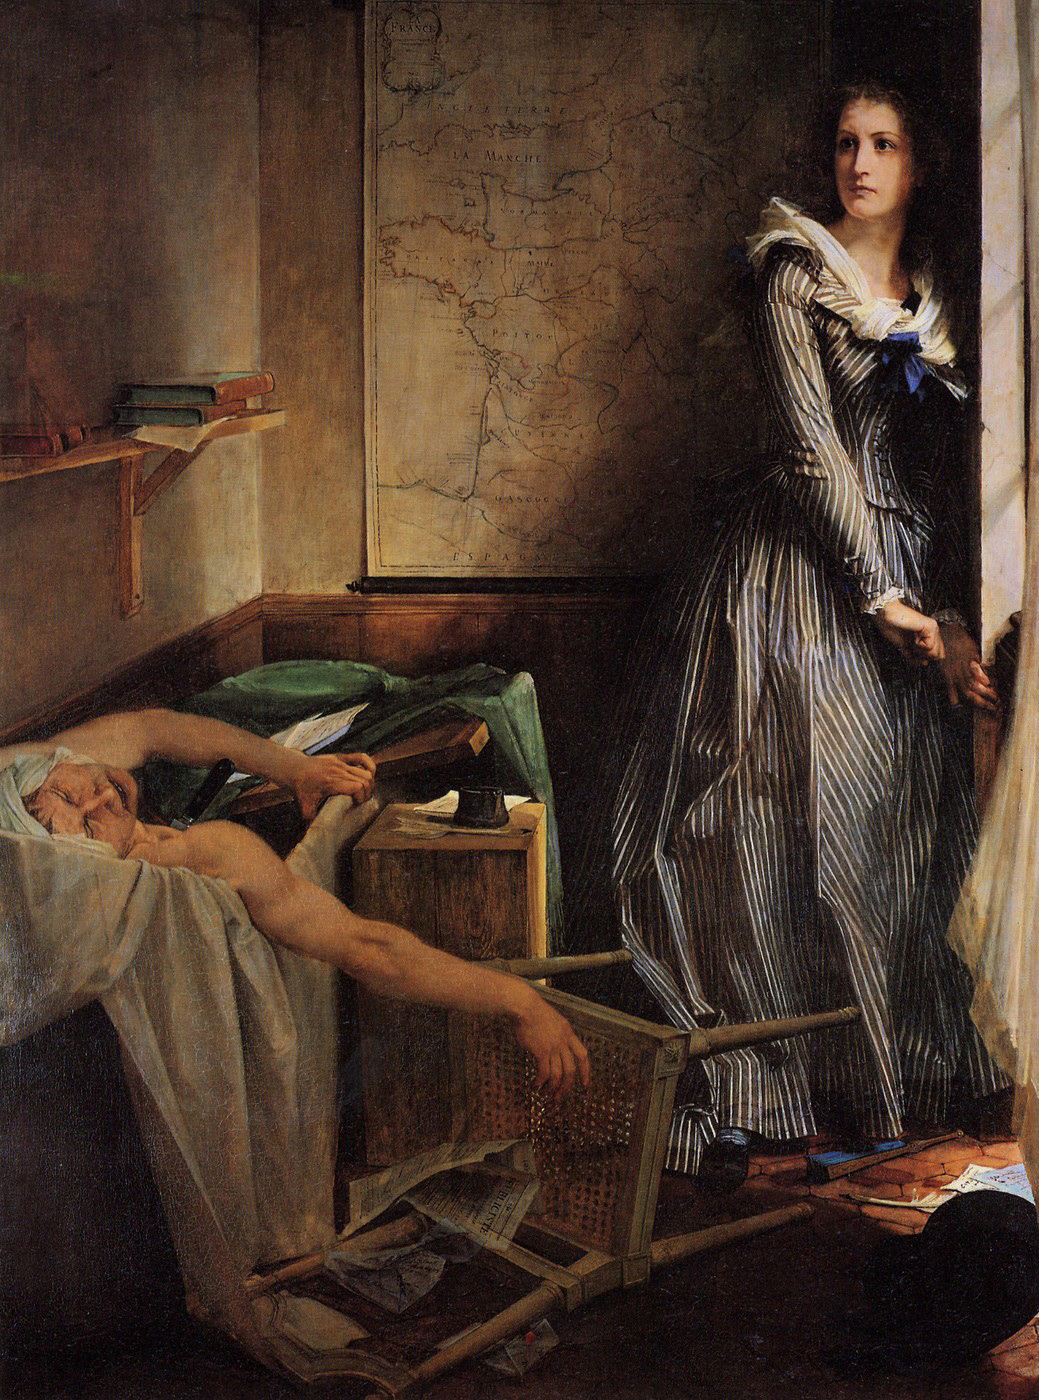 Charlotte Corday by Paul Baudry - 1860 - 203 × 154 cm 